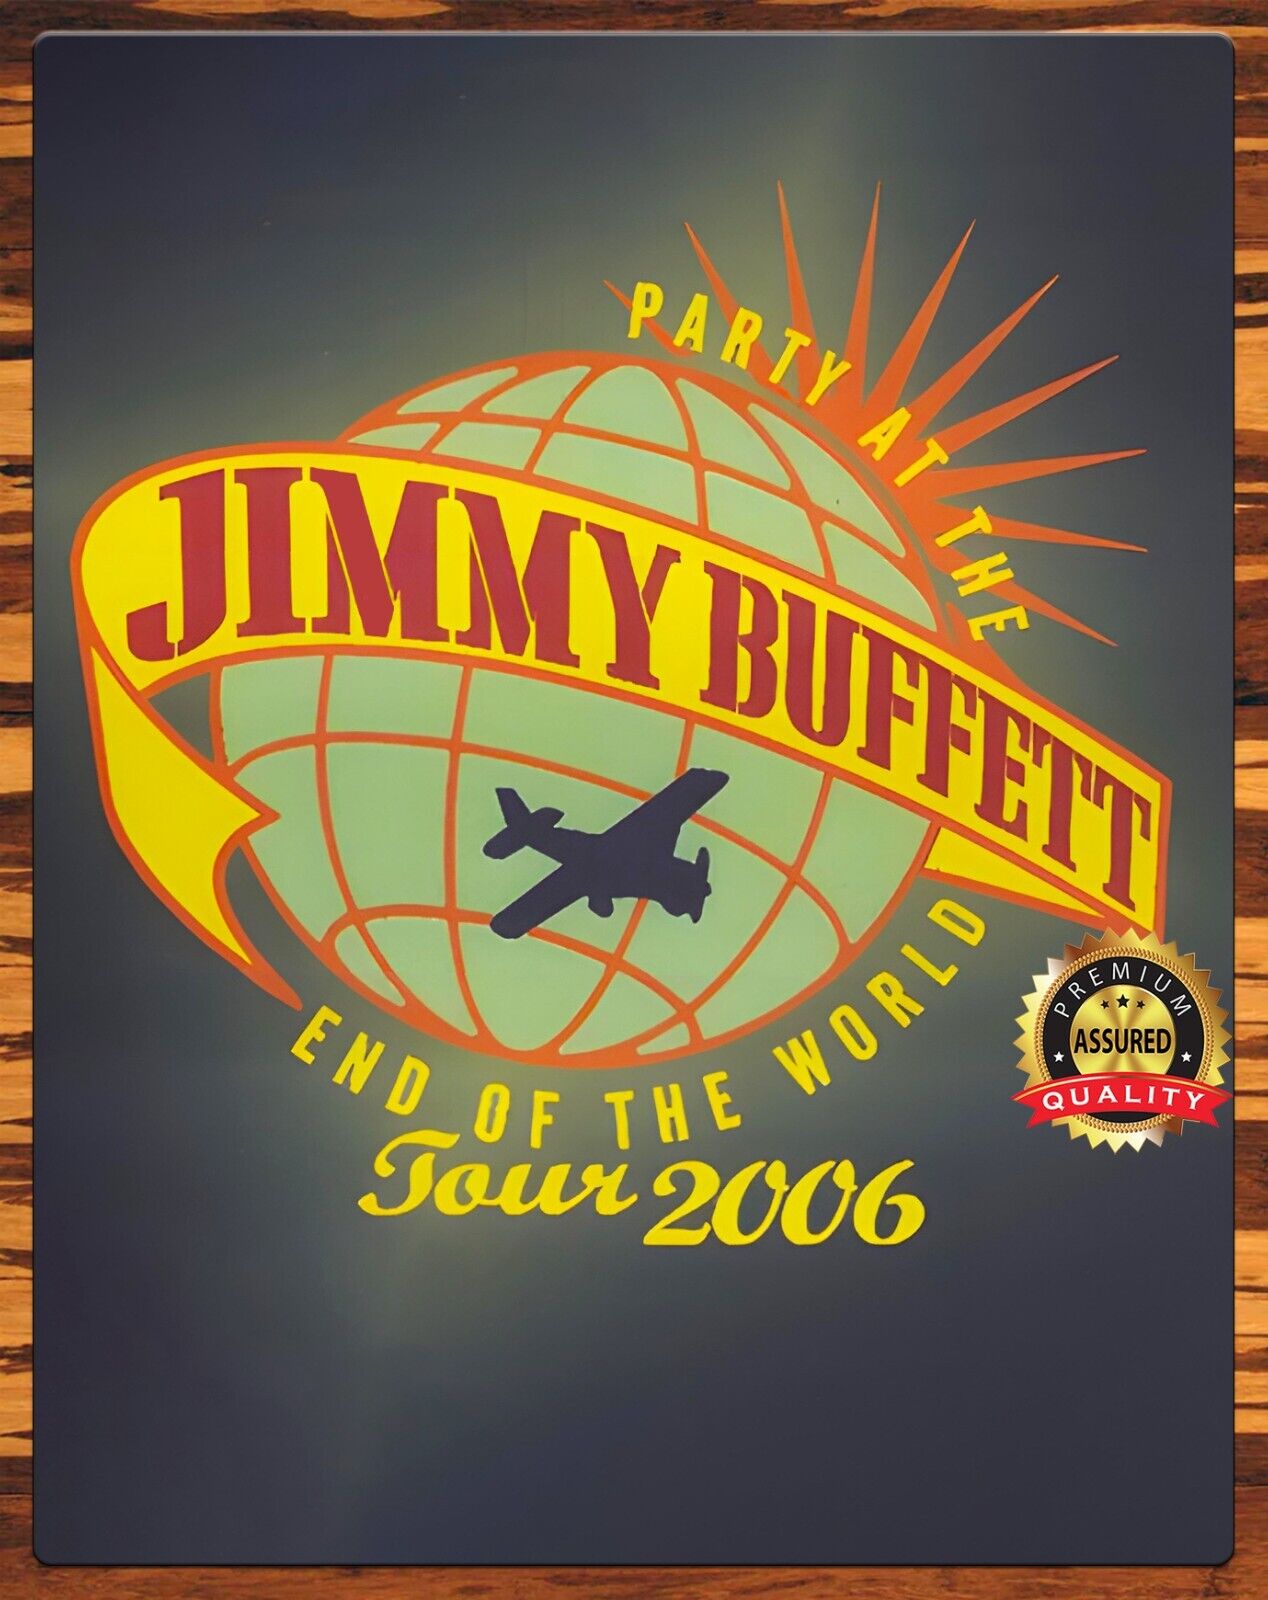 Jimmy Buffett - Party At The End Of The World - Tour 2006 - Metal Sign 11 x 14